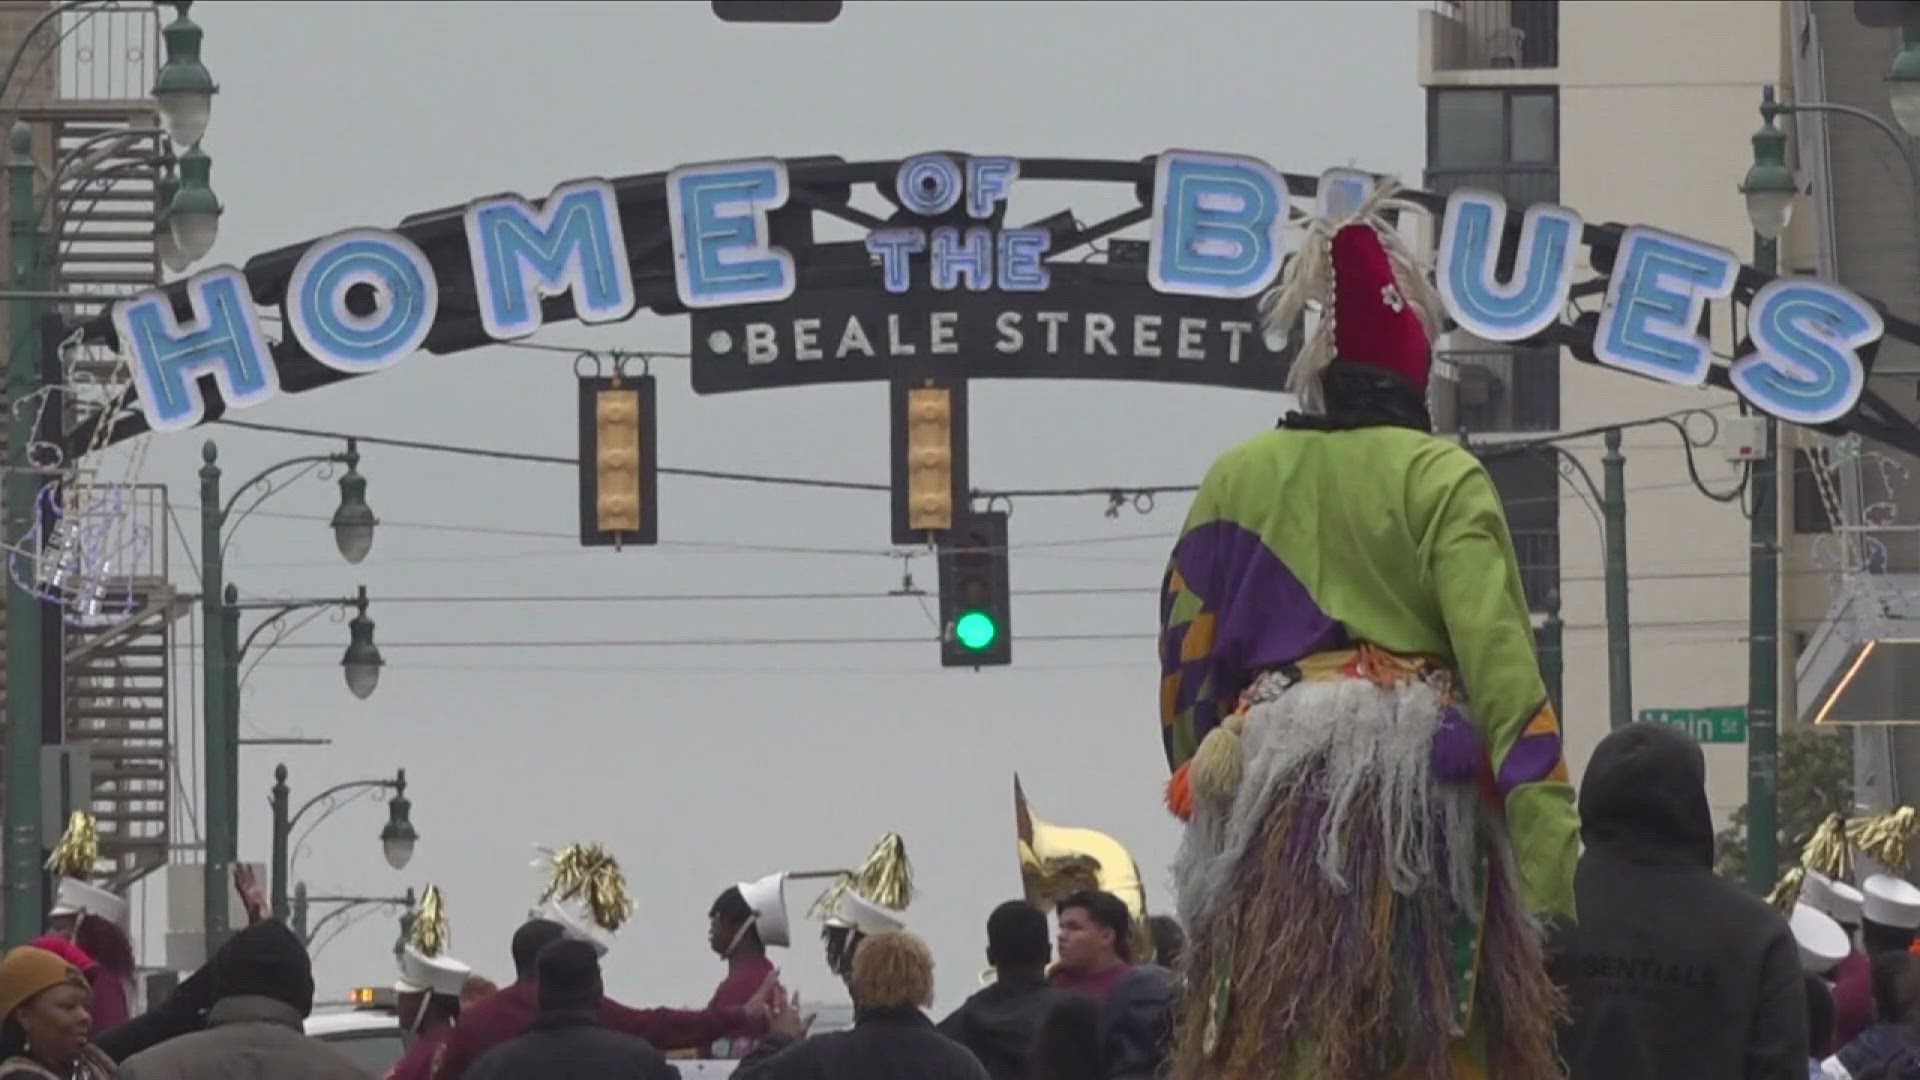 The 37th annual Africa in April Festival kicked off with a parade on Beale Street.